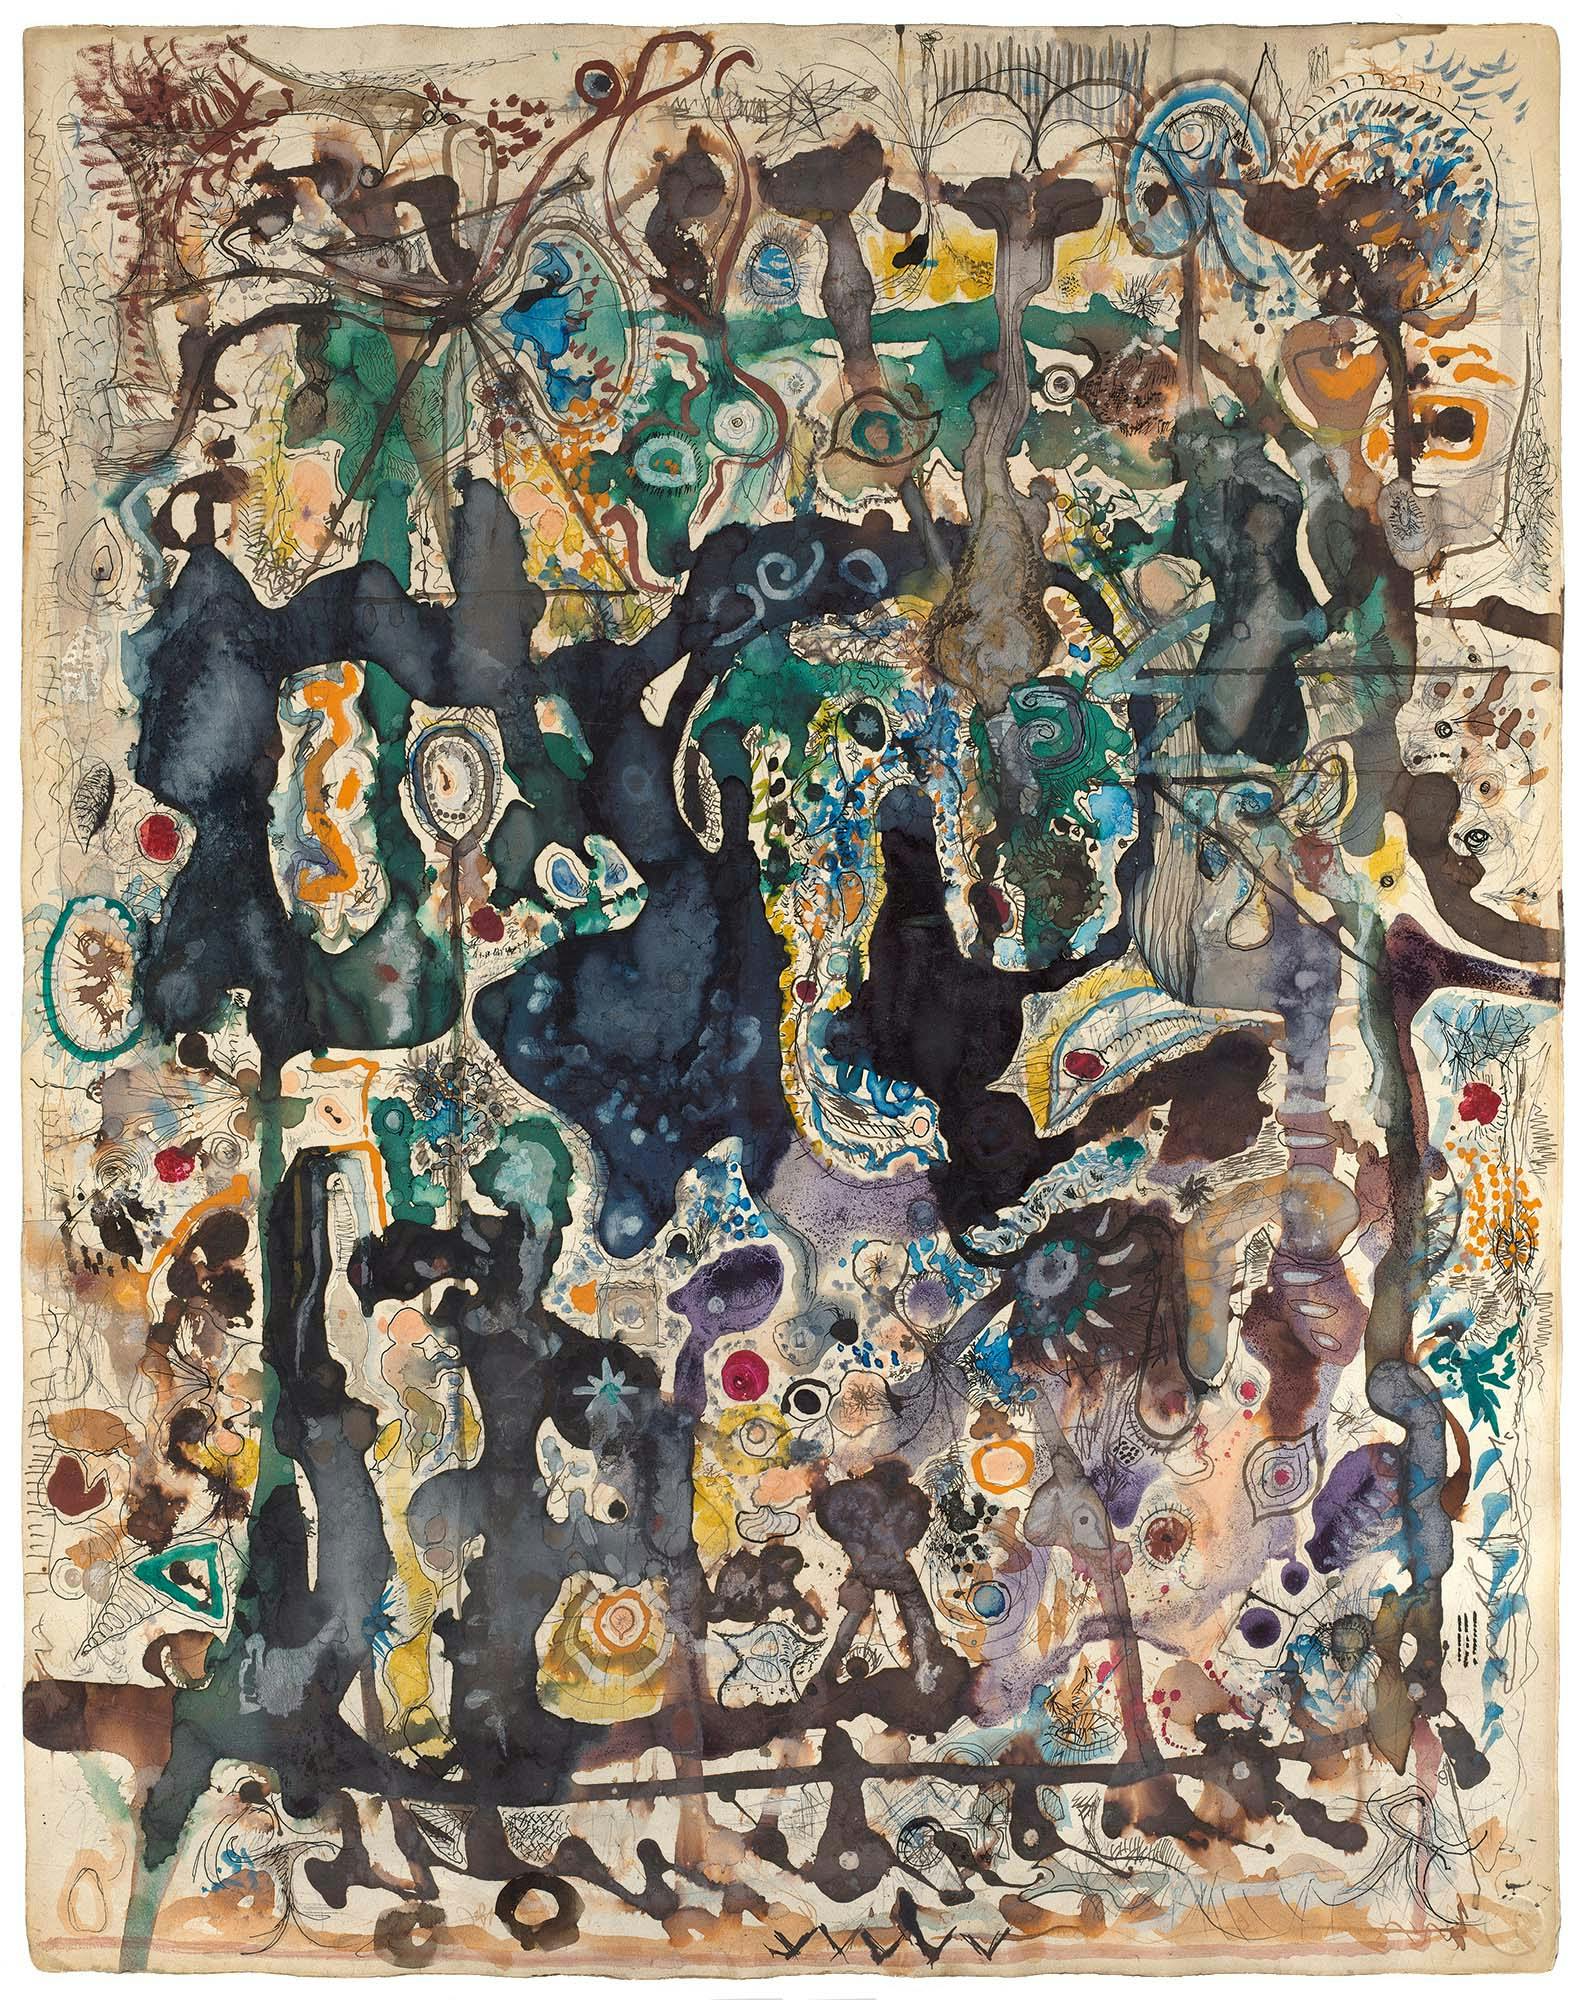 Ionizations III
1944
Watercolor gouache, graphite, and ink on handmade paper on handmade wove paper
29 x 22 7/8 in. (73.7 x 58.1 cm)
 – The Richard Pousette-Dart Foundation